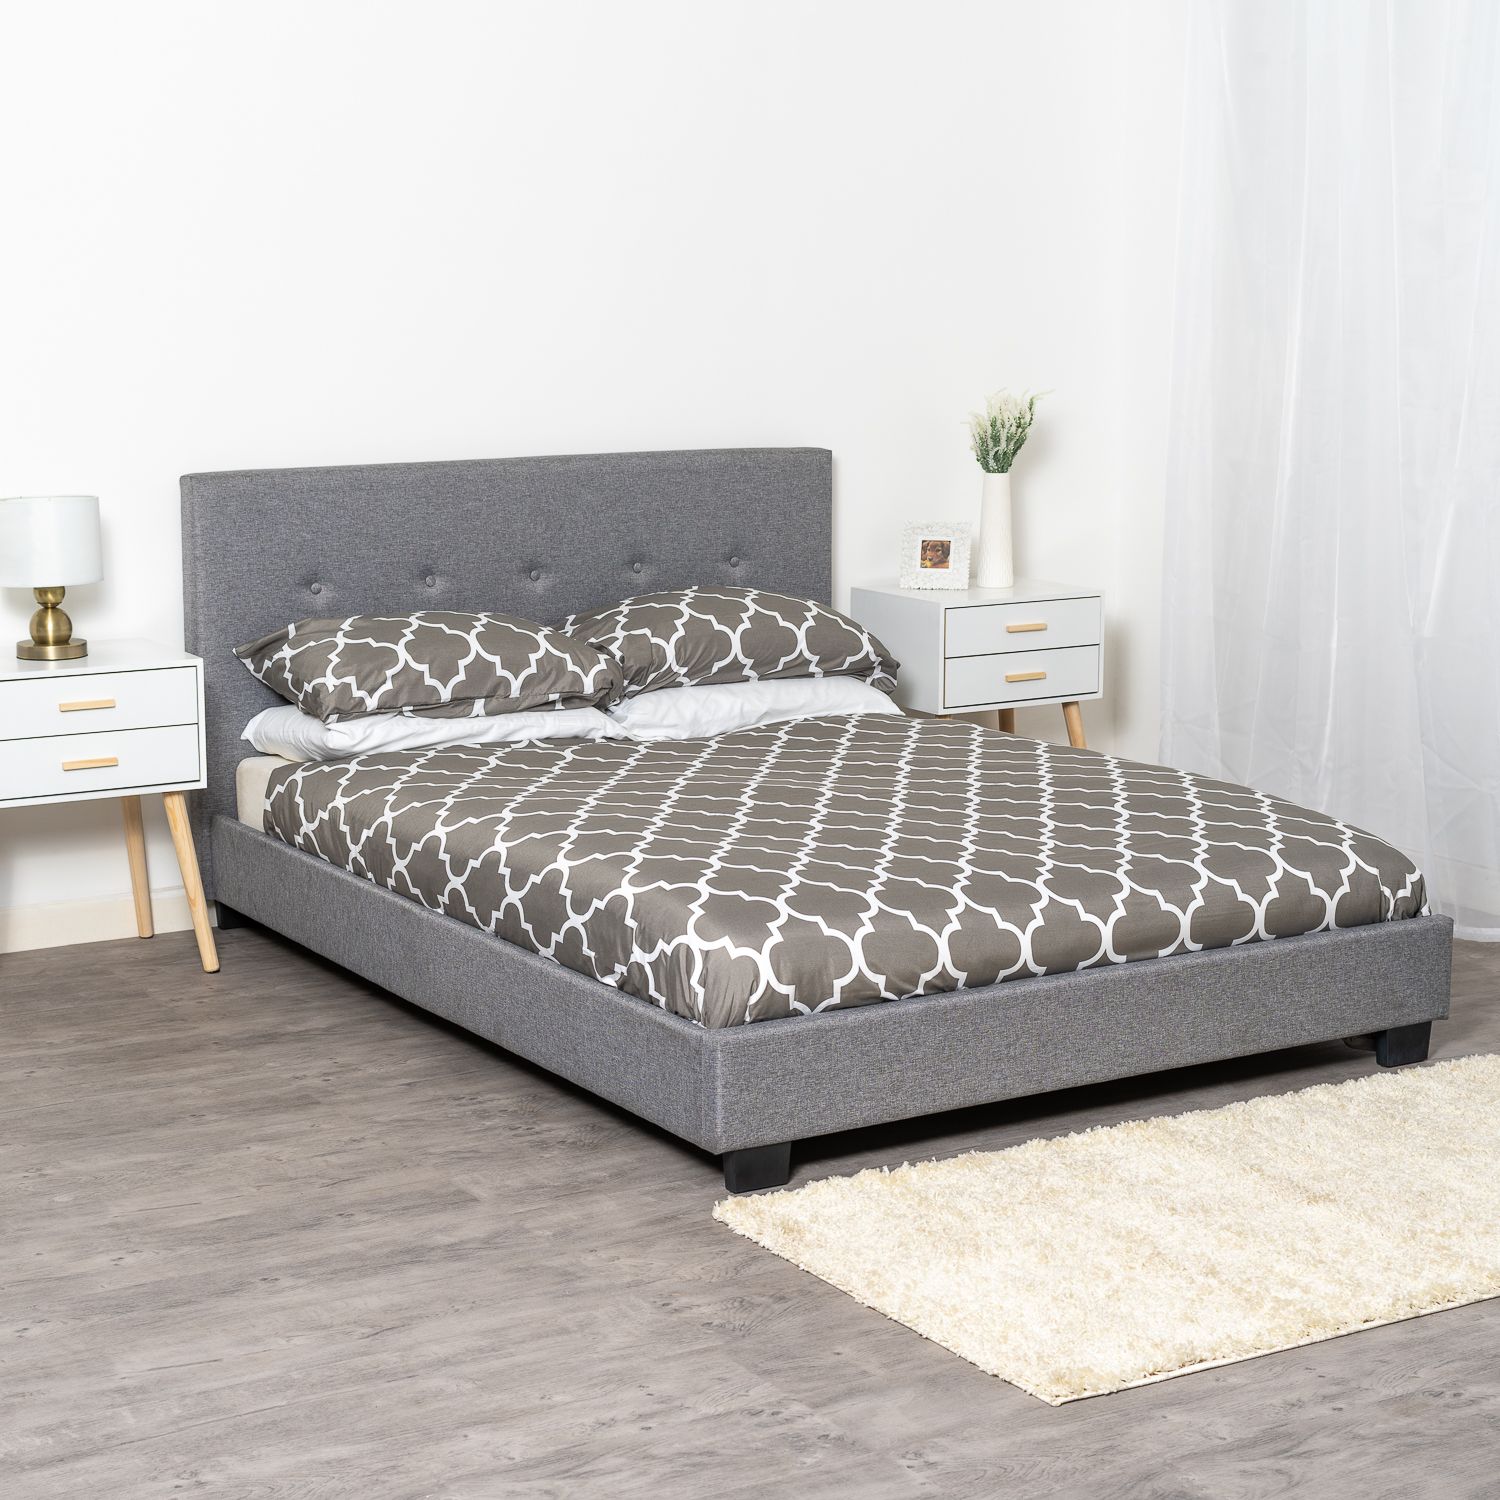 Double Grey Oscar Bed Frame And, Bed Frame With Mattress Set